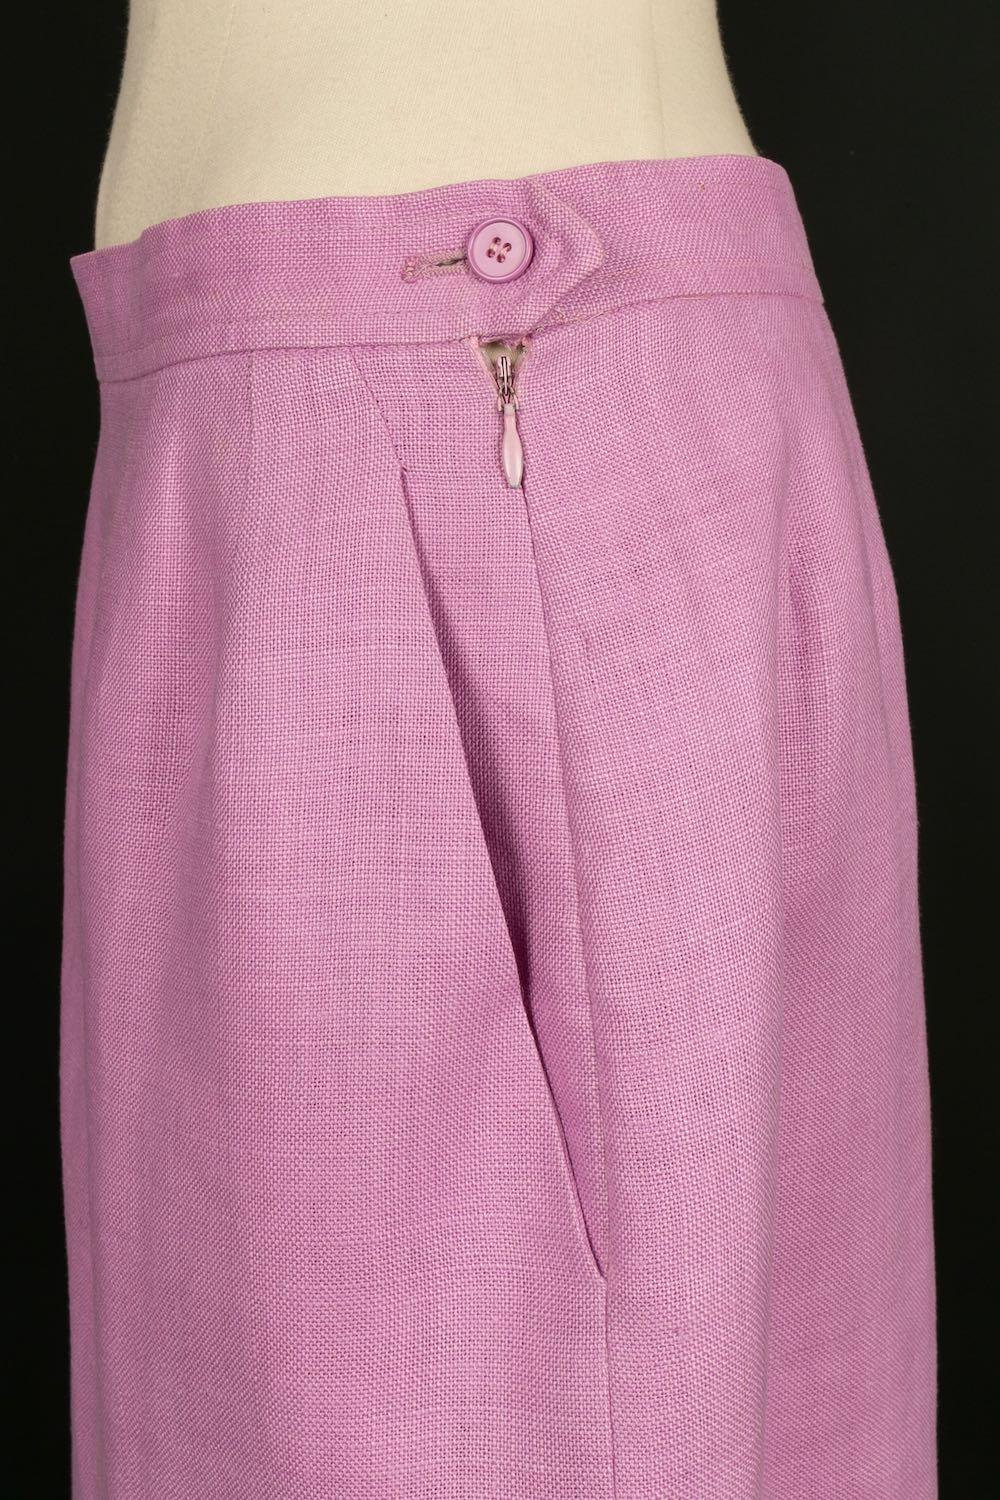 Christian Lacroix Jacket and Skirt in Mauve Suit For Sale 3